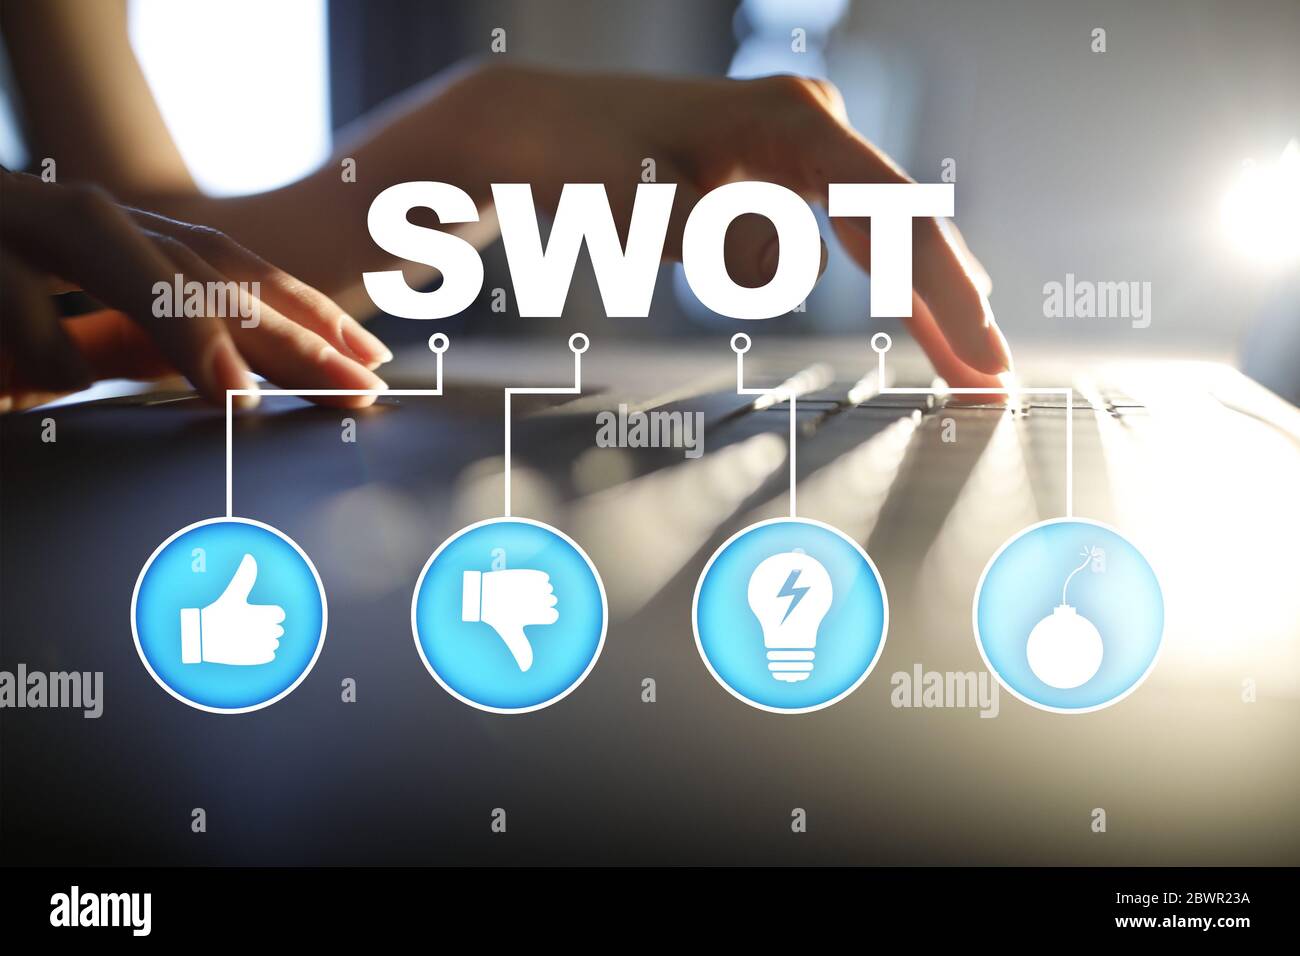 Swot analysis concept - a study by an organization to identify its internal strengths, weaknesses, as well as its external opportunities and threats. Stock Photo